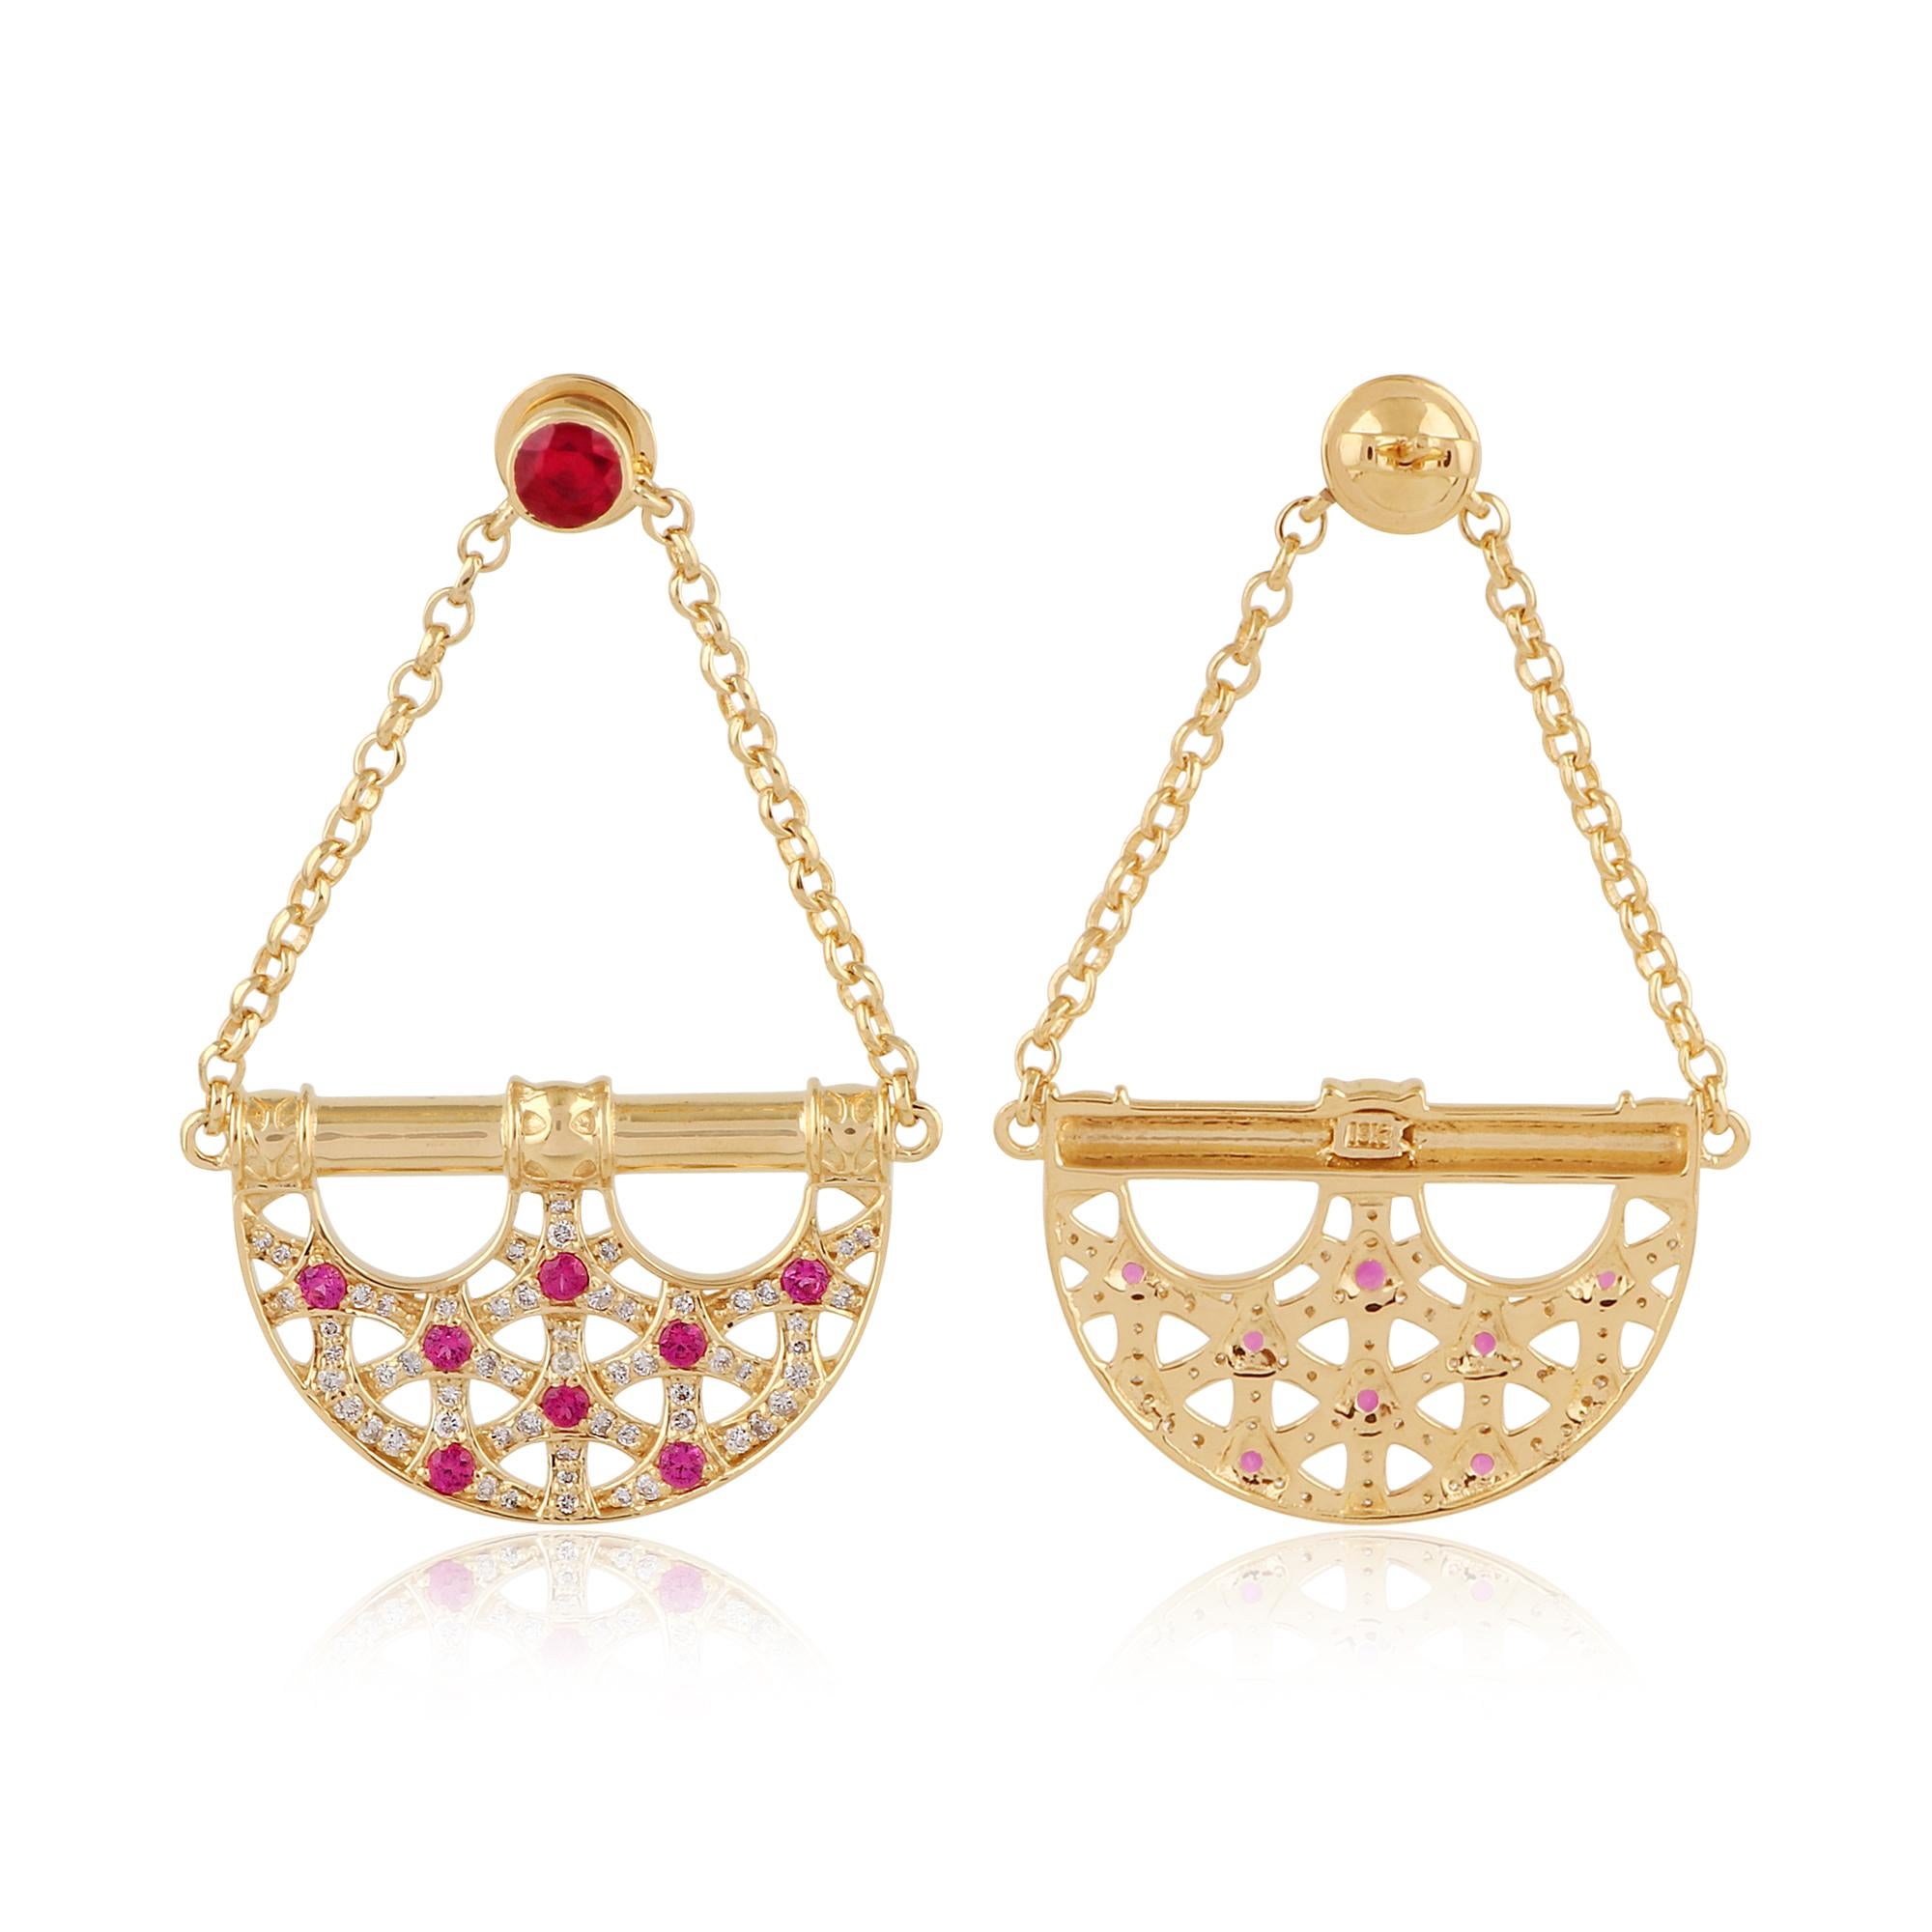 These statement earrings are designed to be noticed, with a striking dangle design. Crafted with meticulous attention to detail, these stunning earrings are a true testament to timeless beauty.

These are perfect Gift for Mom, Fiancée, Daughter,